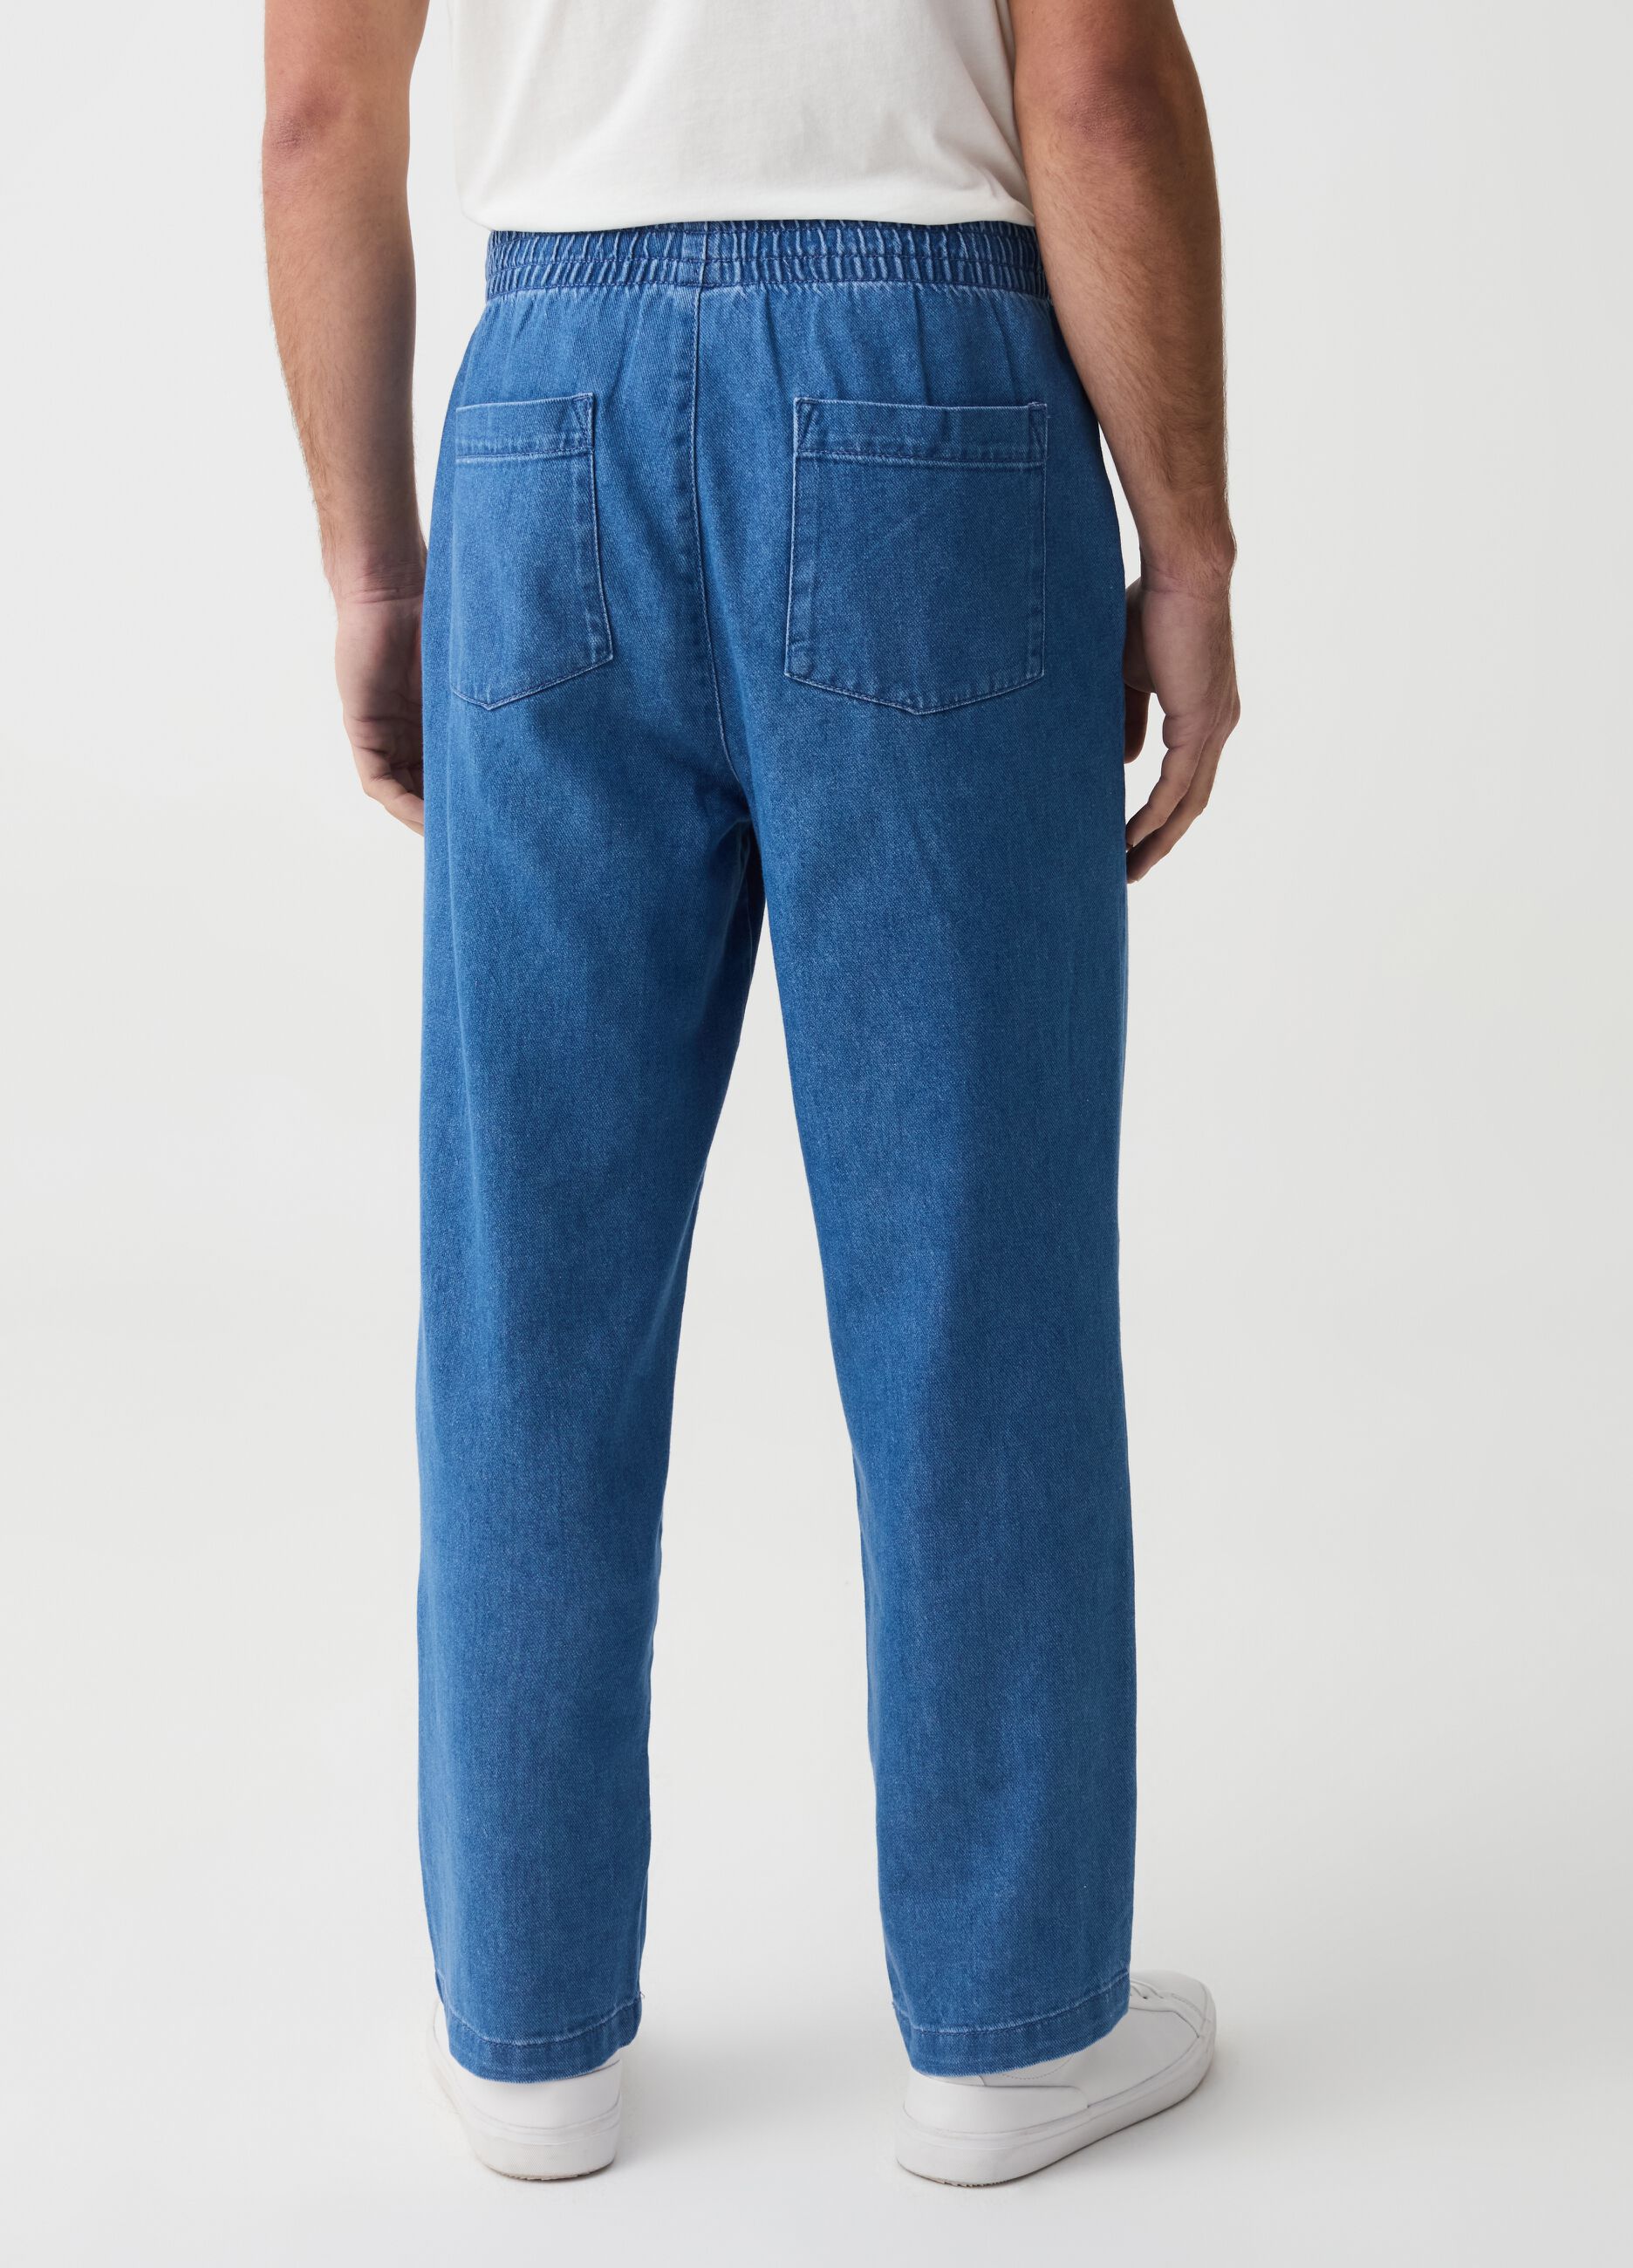 Chinos joggers relaxed fit de denim